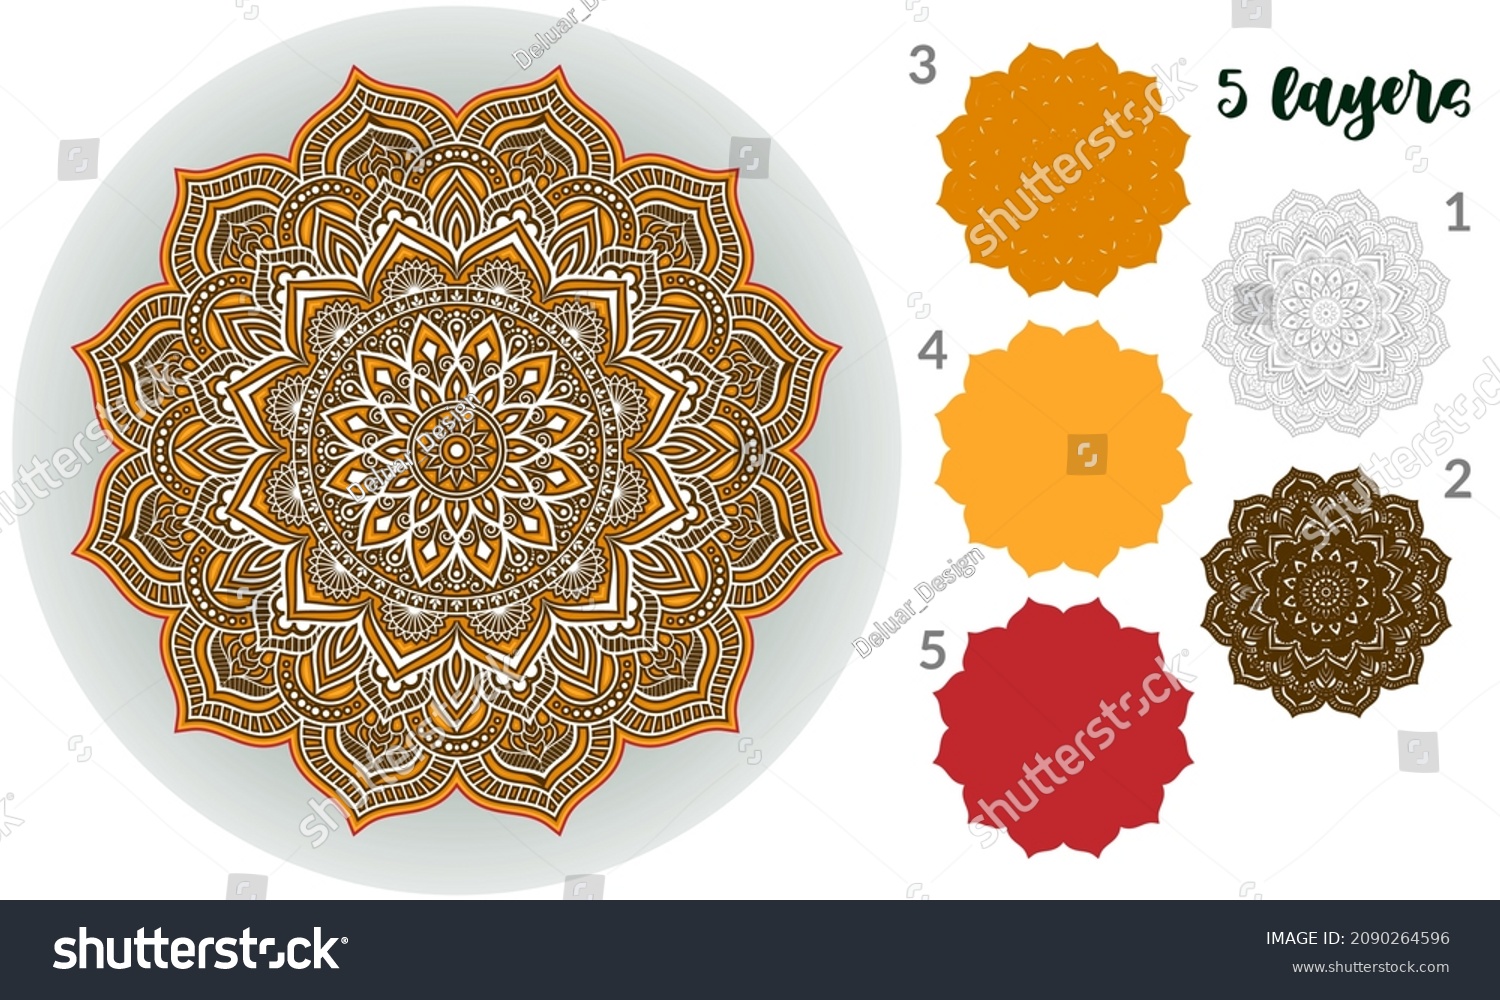 SVG of 3d Layered Mandala SVG. Mandala Multilayer Cut File, Five layers. Multilayer elements for paper cutting or machine cutting– 3d SVG Flowers svg